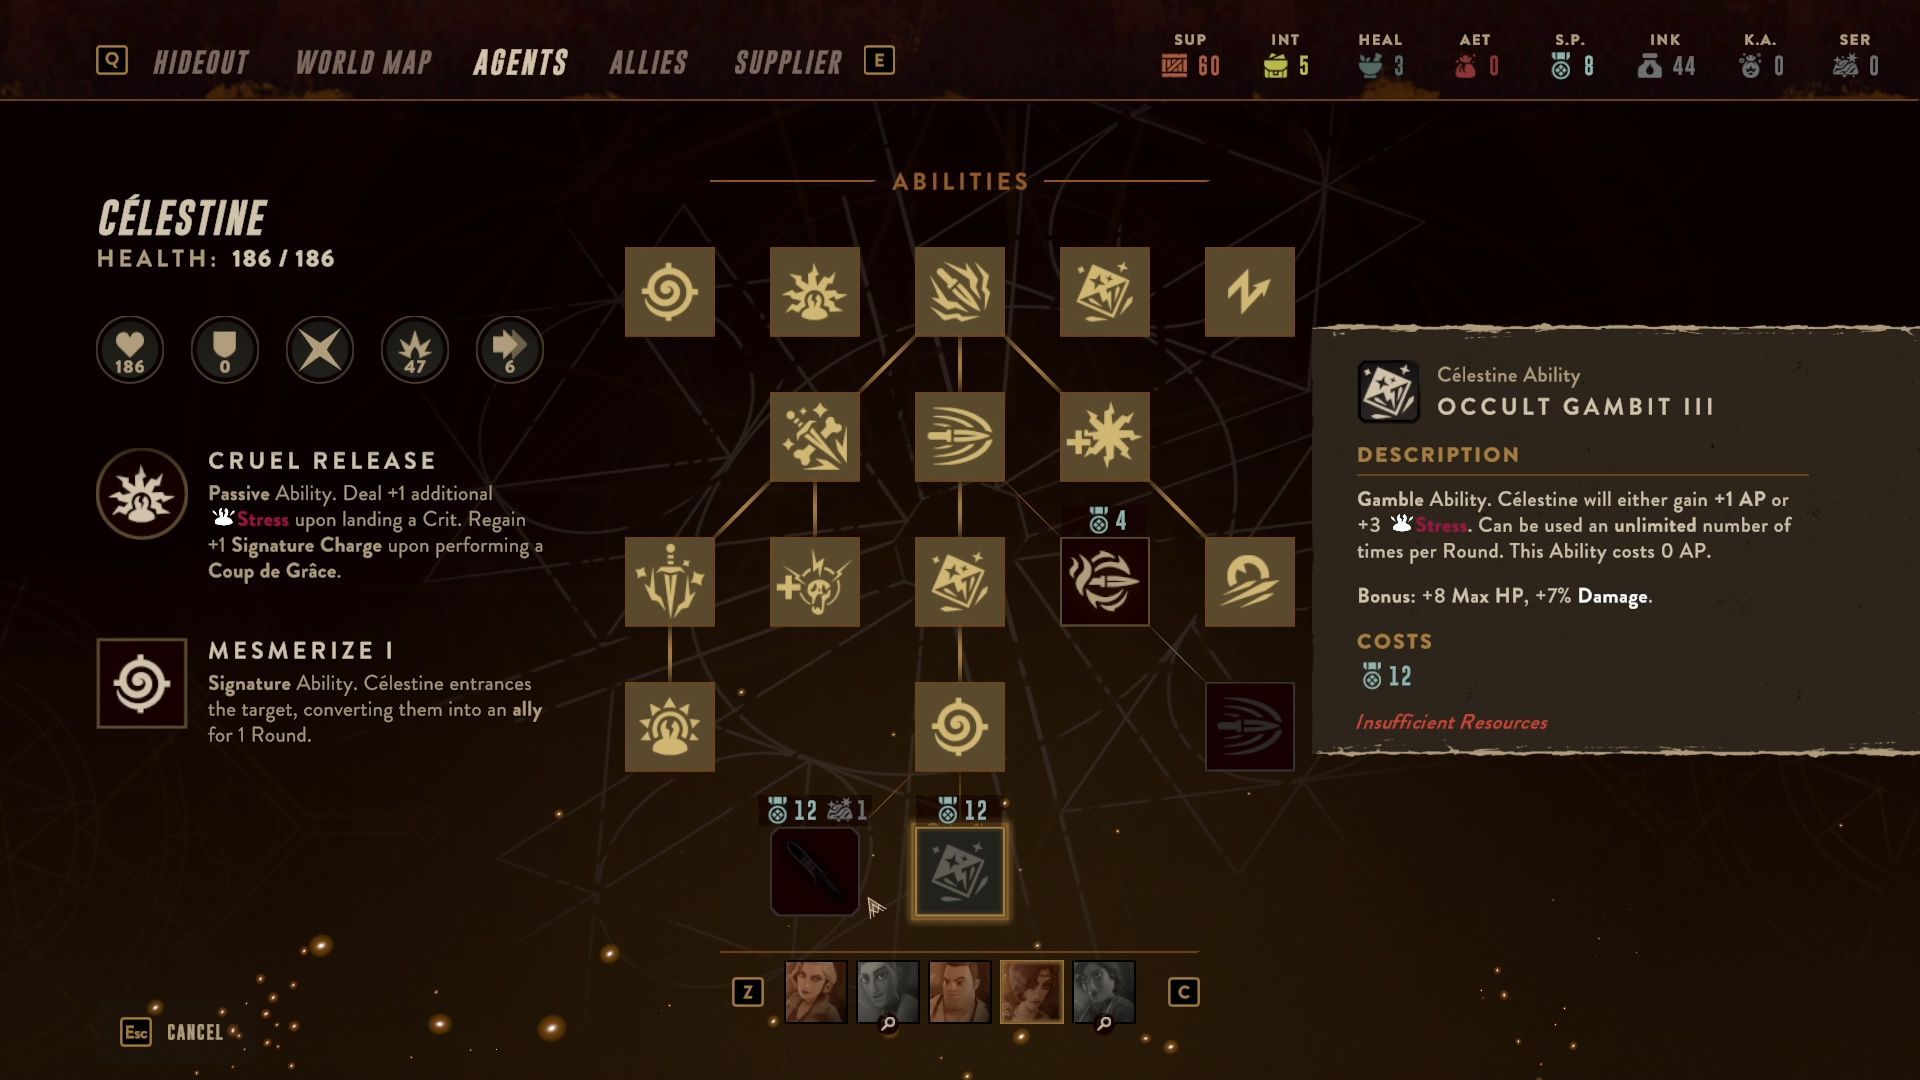 The assassin Celestine's skill tree, focused on her Occult Gambit ability that converts sanity into bonus actions